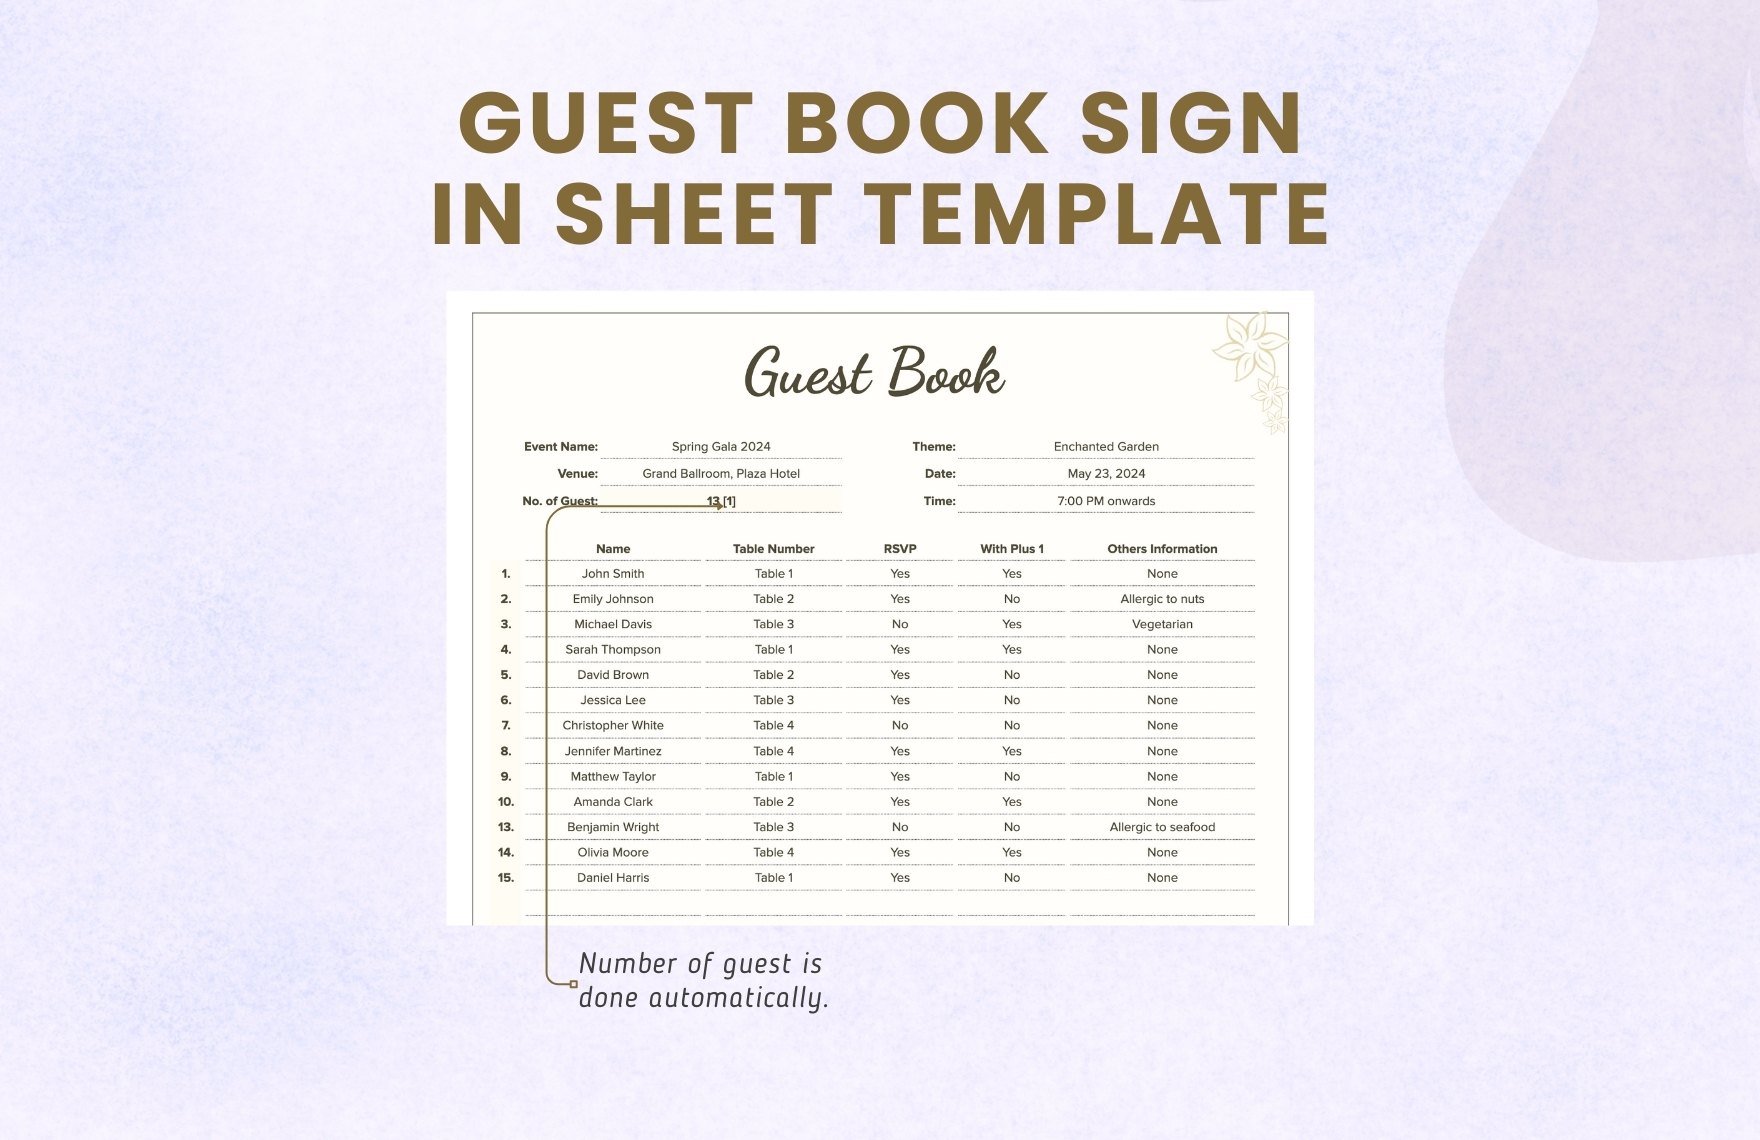 Guest Book Sign in Sheet Template